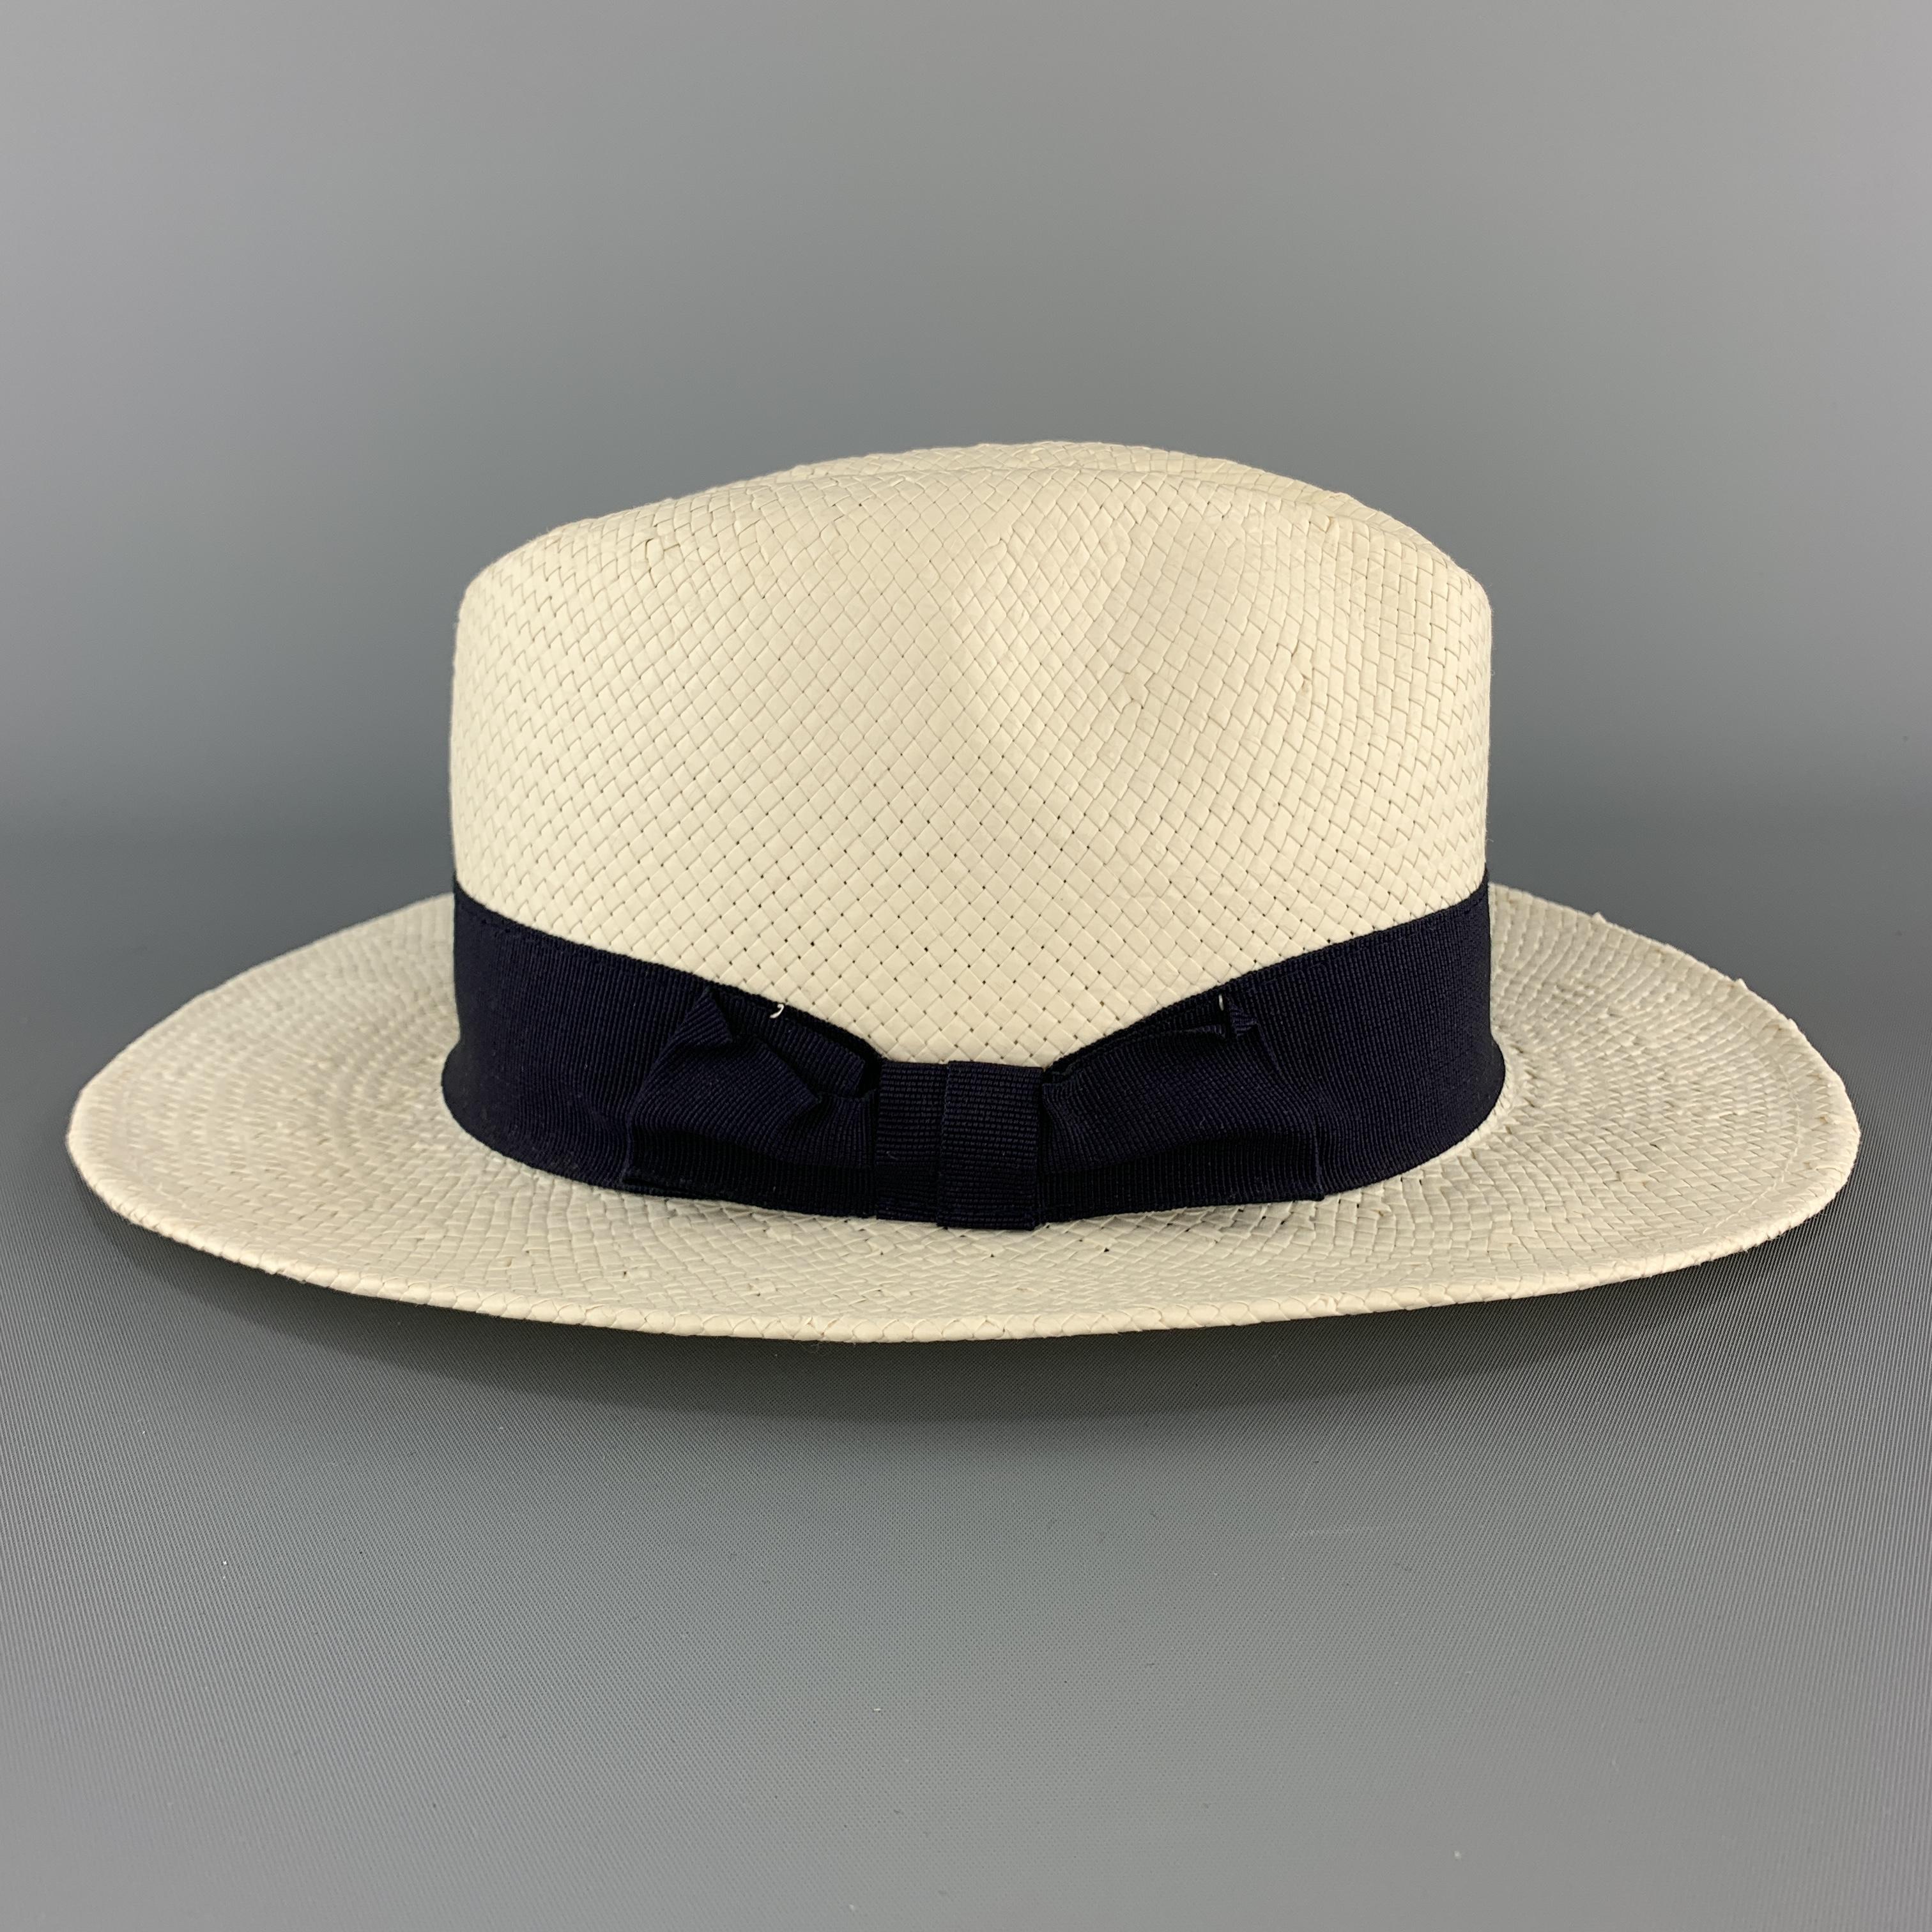 SAKS FIFTH AVENUE fedora comes in cream woven straw with a navy blue ribbon stripe. Made in Italy.

Excellent Pre-Owned Condition.
Marked: (no size)

Measurements:

Opening: 23 in.
Brim: 2.25 in.
Height: 4.5 in.